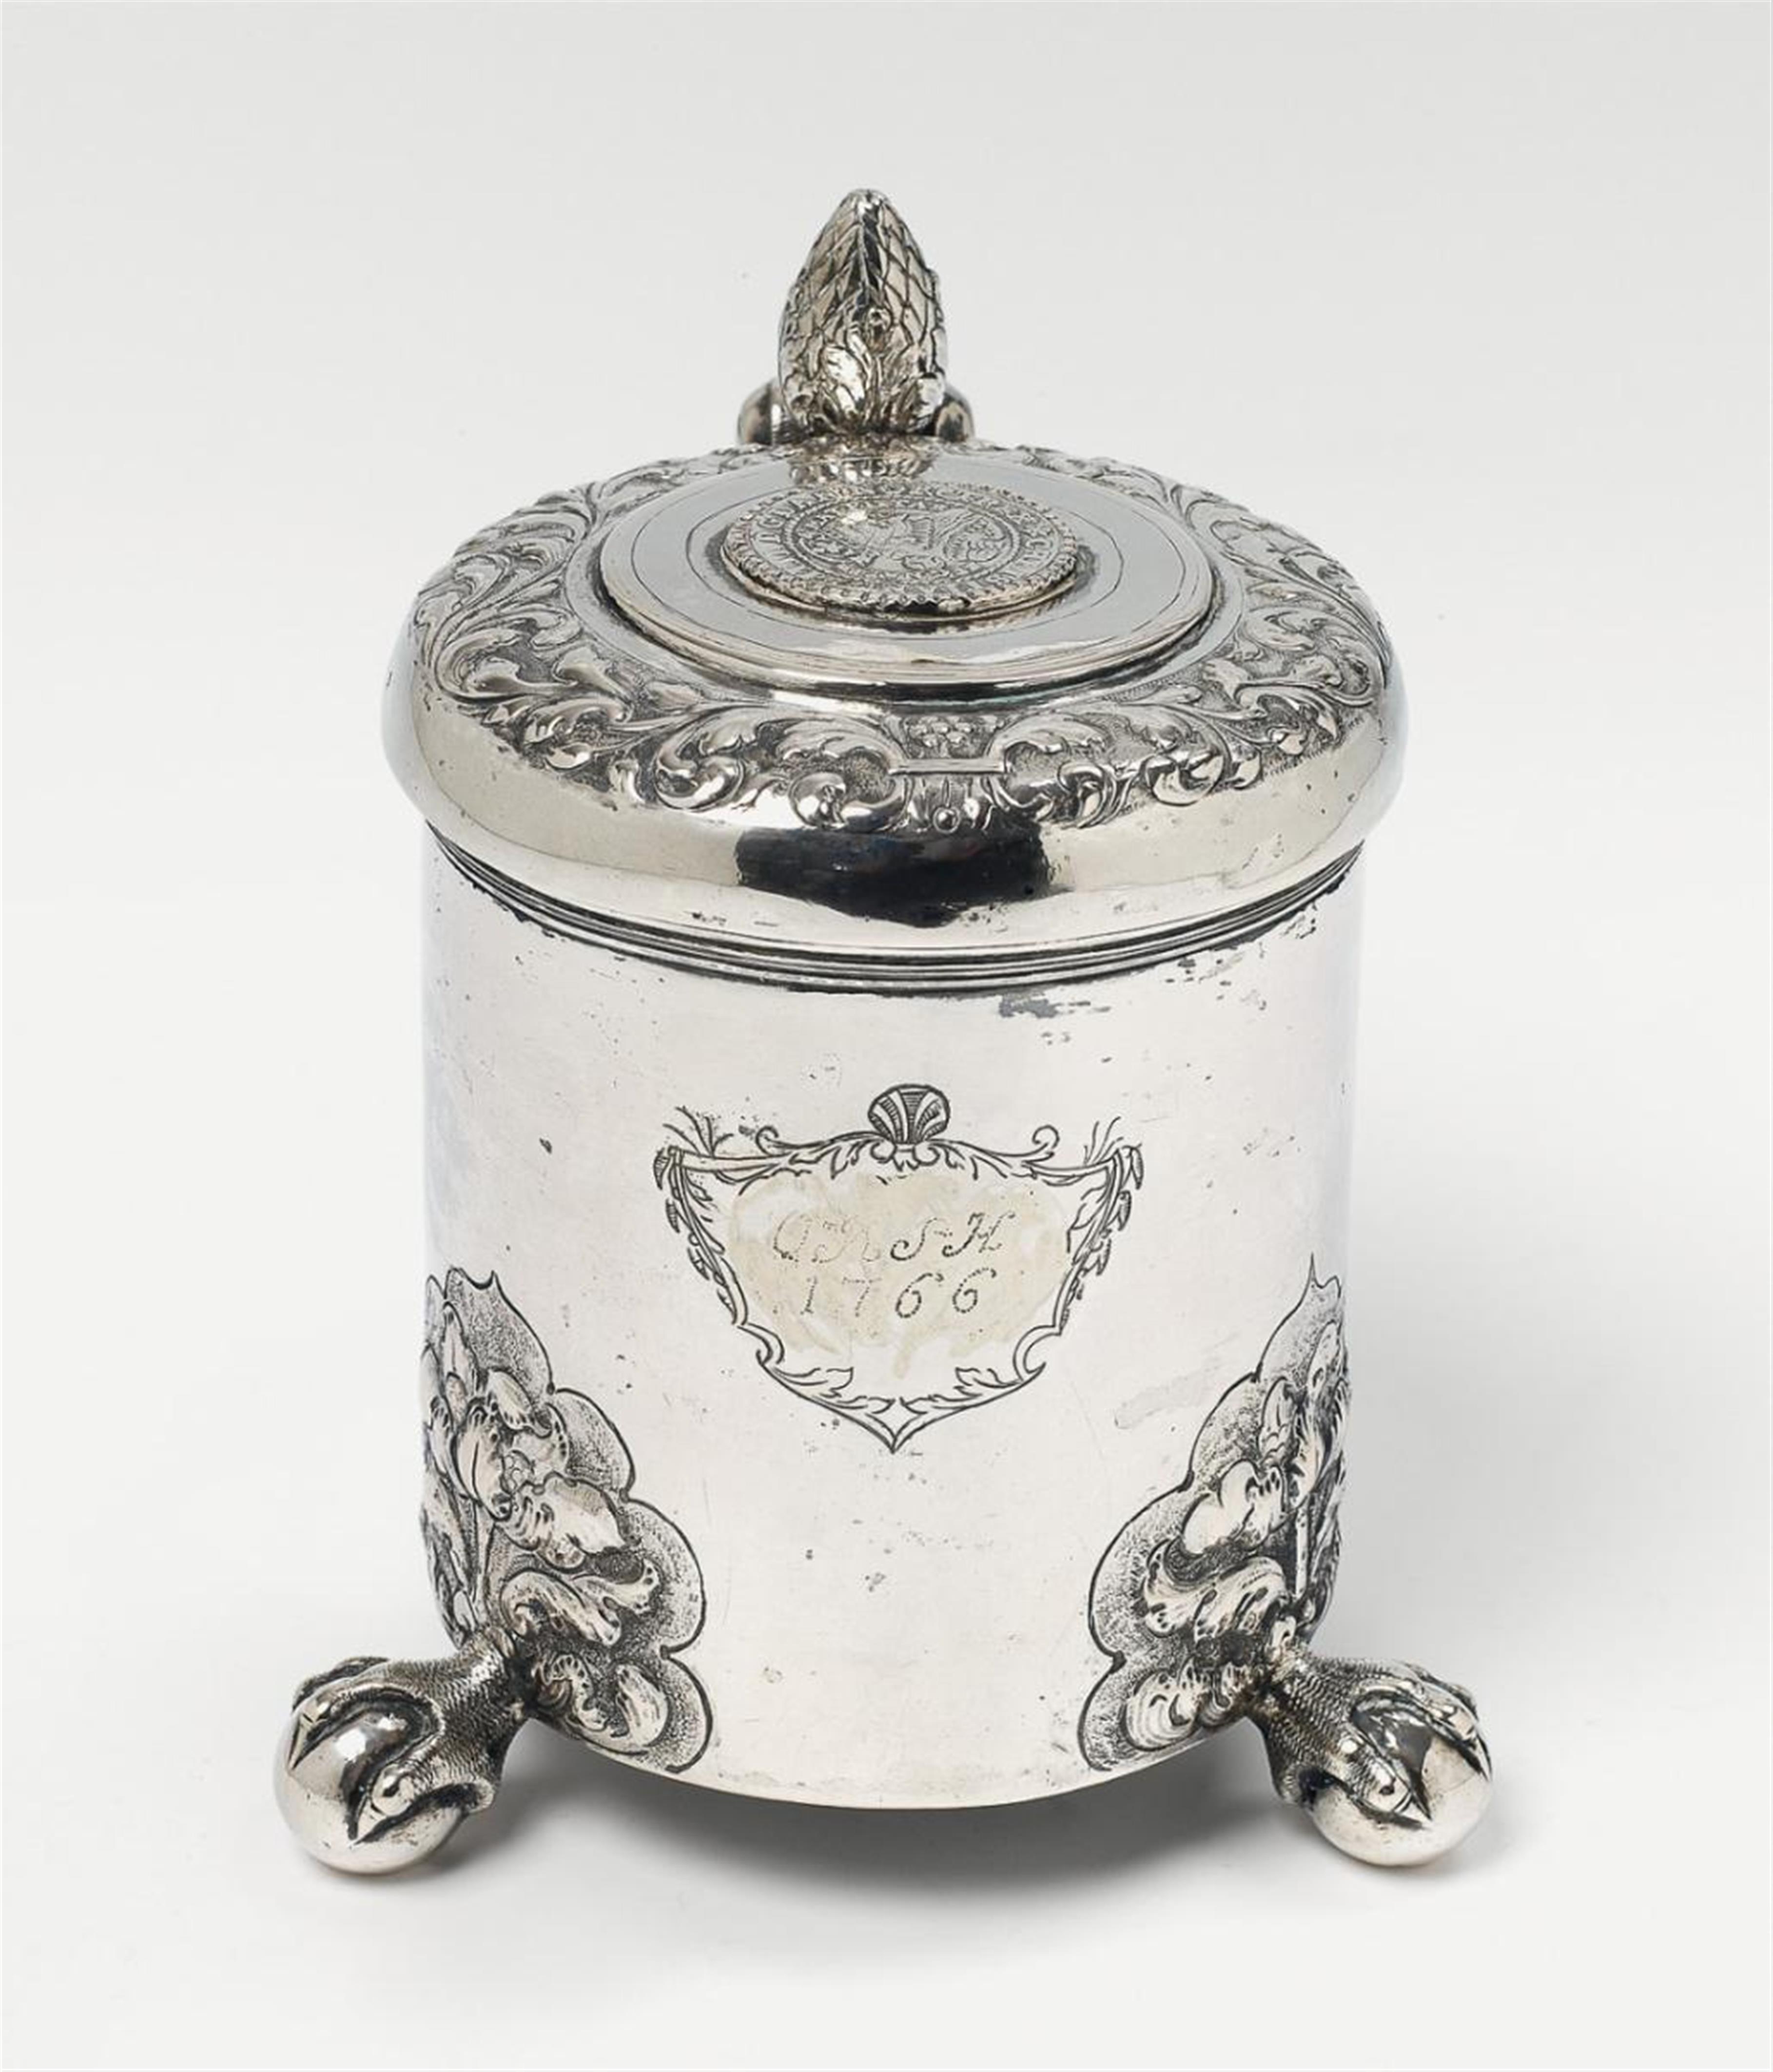 A silver lidded tankard monogrammed "OKSH" and dated 1766. Probably Danish, 18th C. - image-1